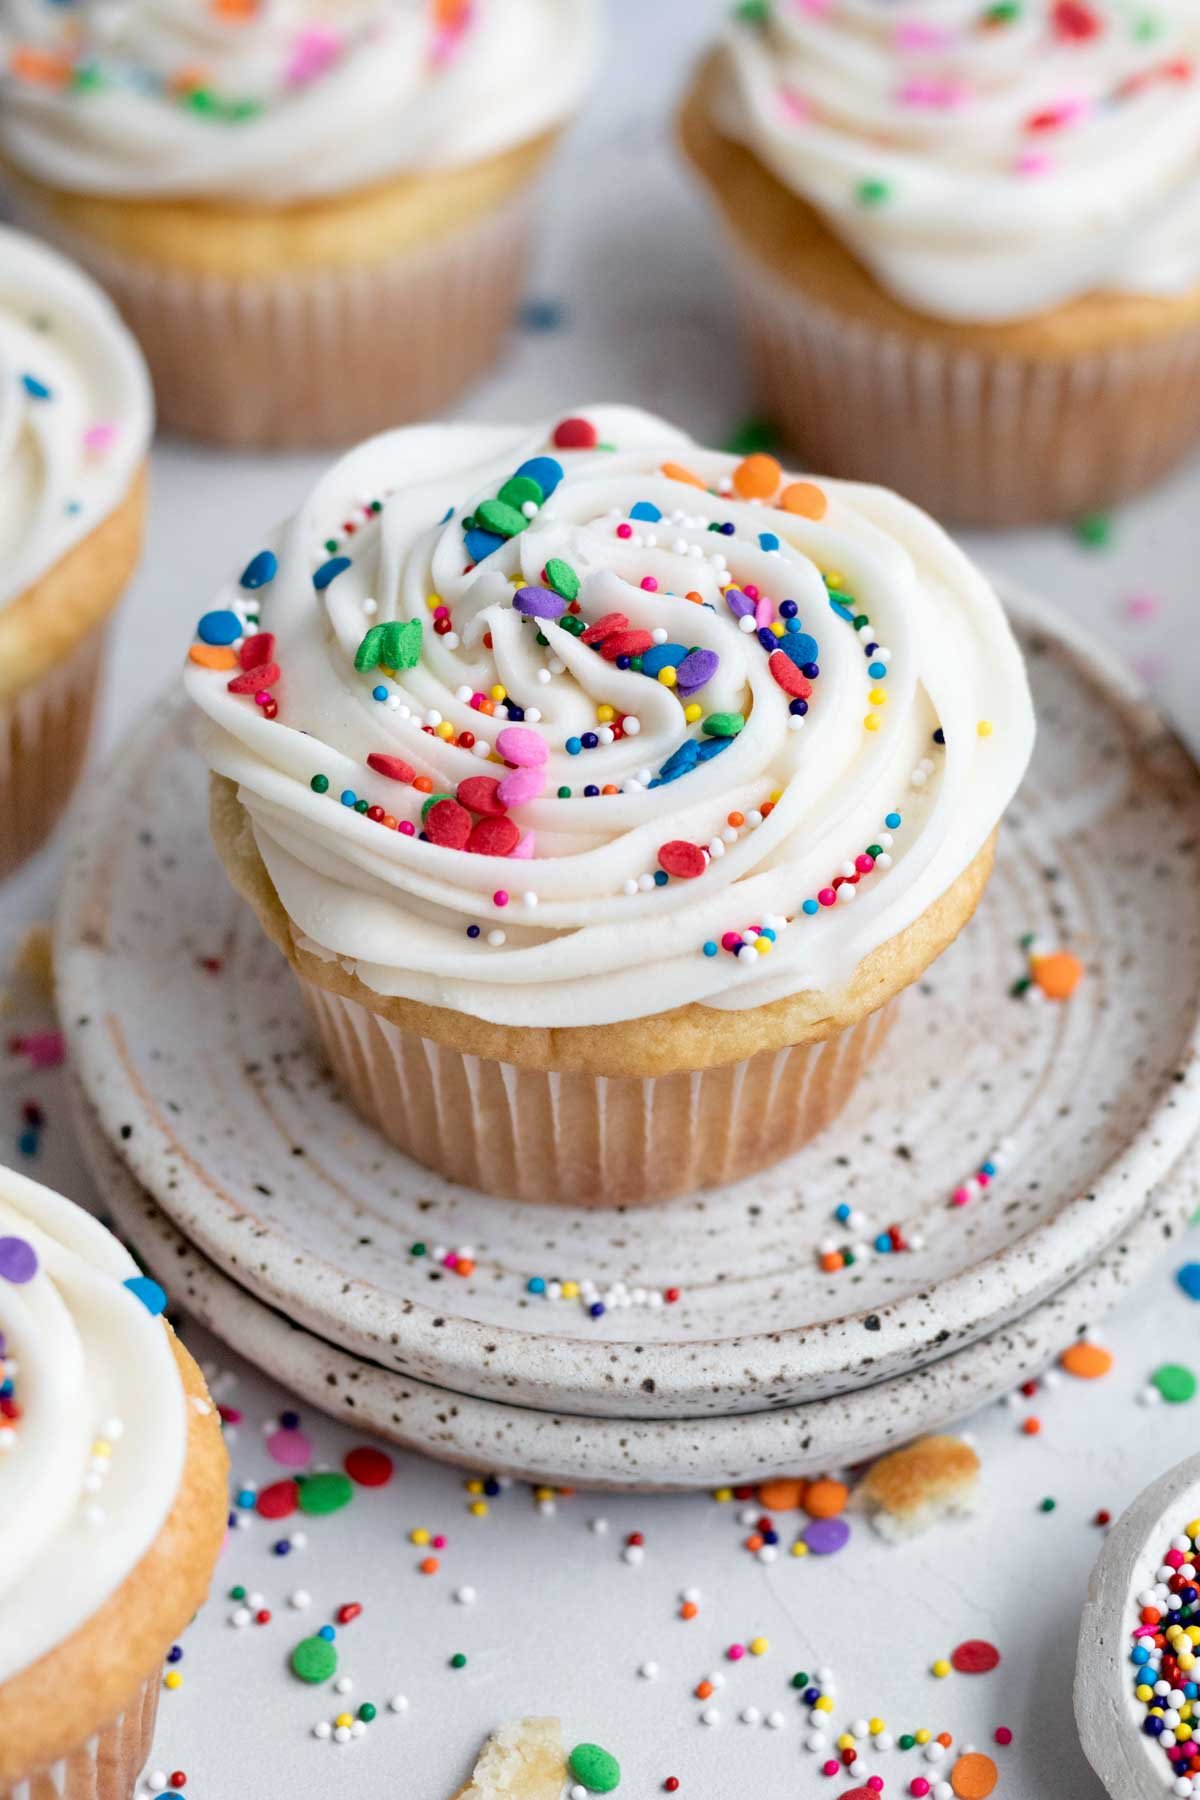 Rainbow sprinkles fall in an eye-catching design on the swirl of the Gluten Free Vanilla Cupcake.